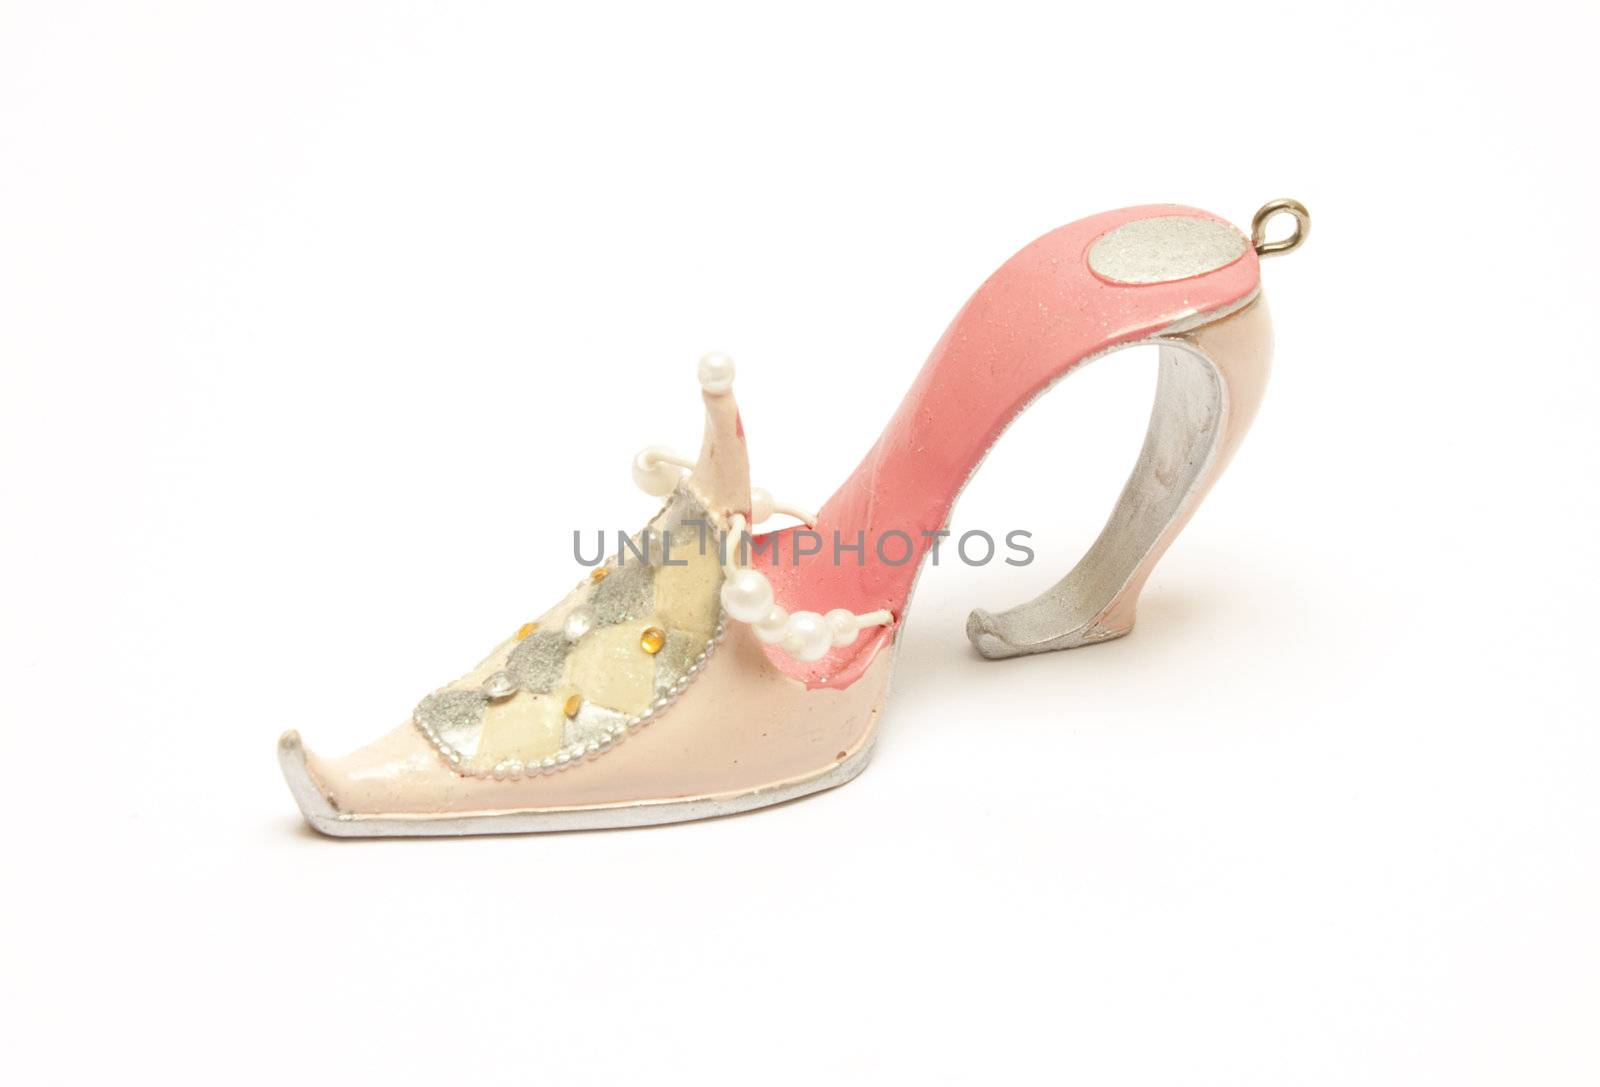 Fancy women shoes over the white background